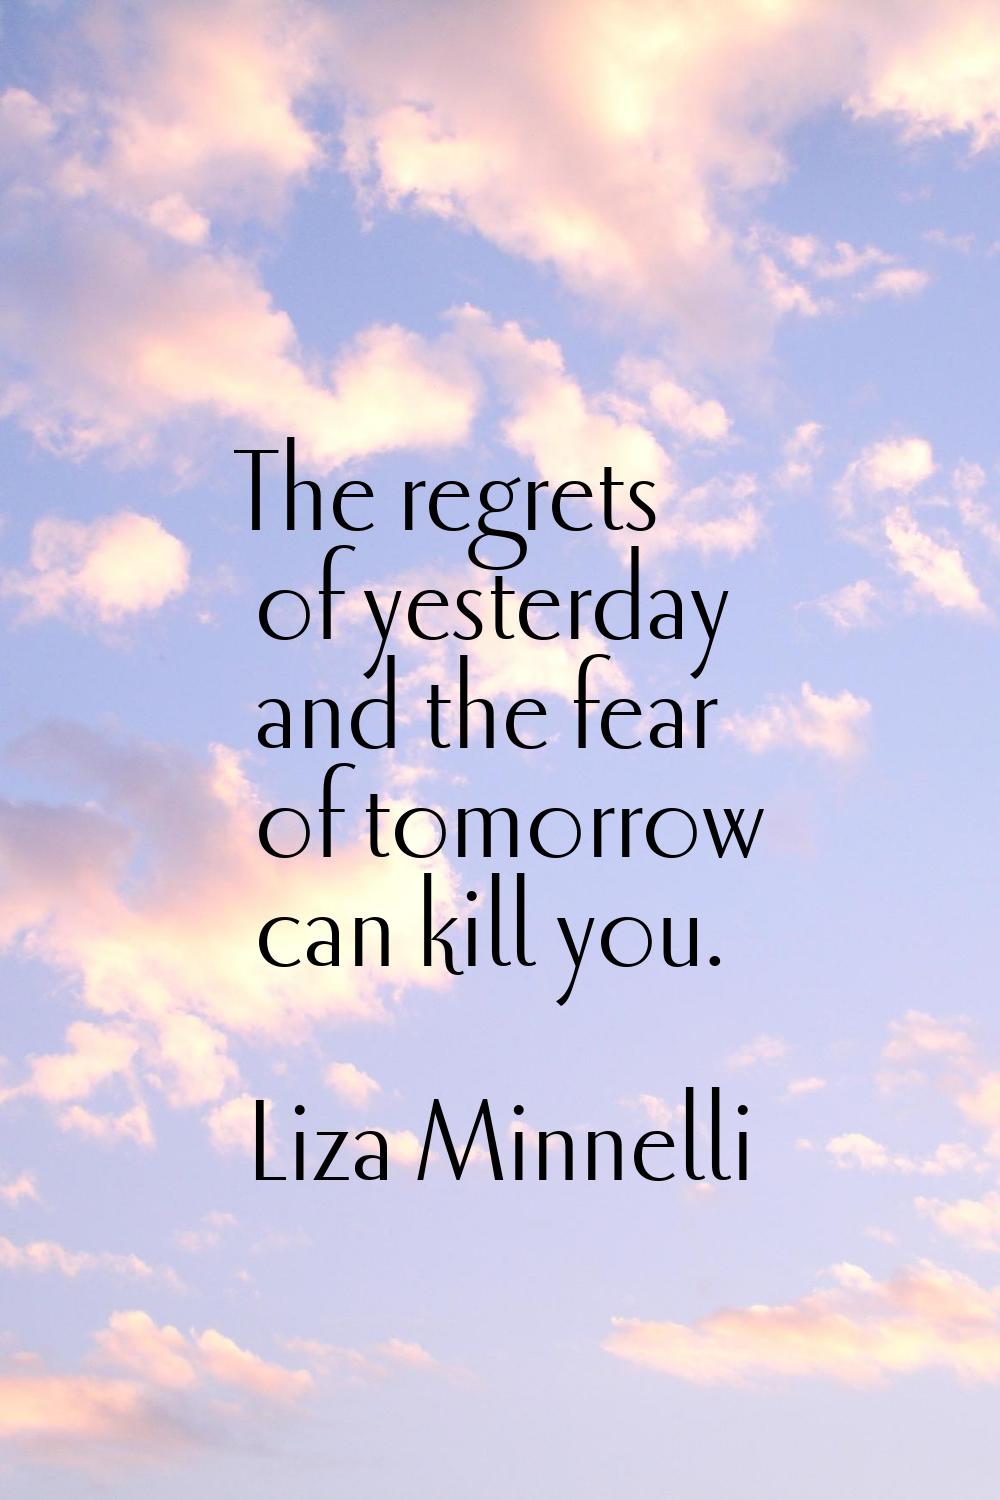 The regrets of yesterday and the fear of tomorrow can kill you.